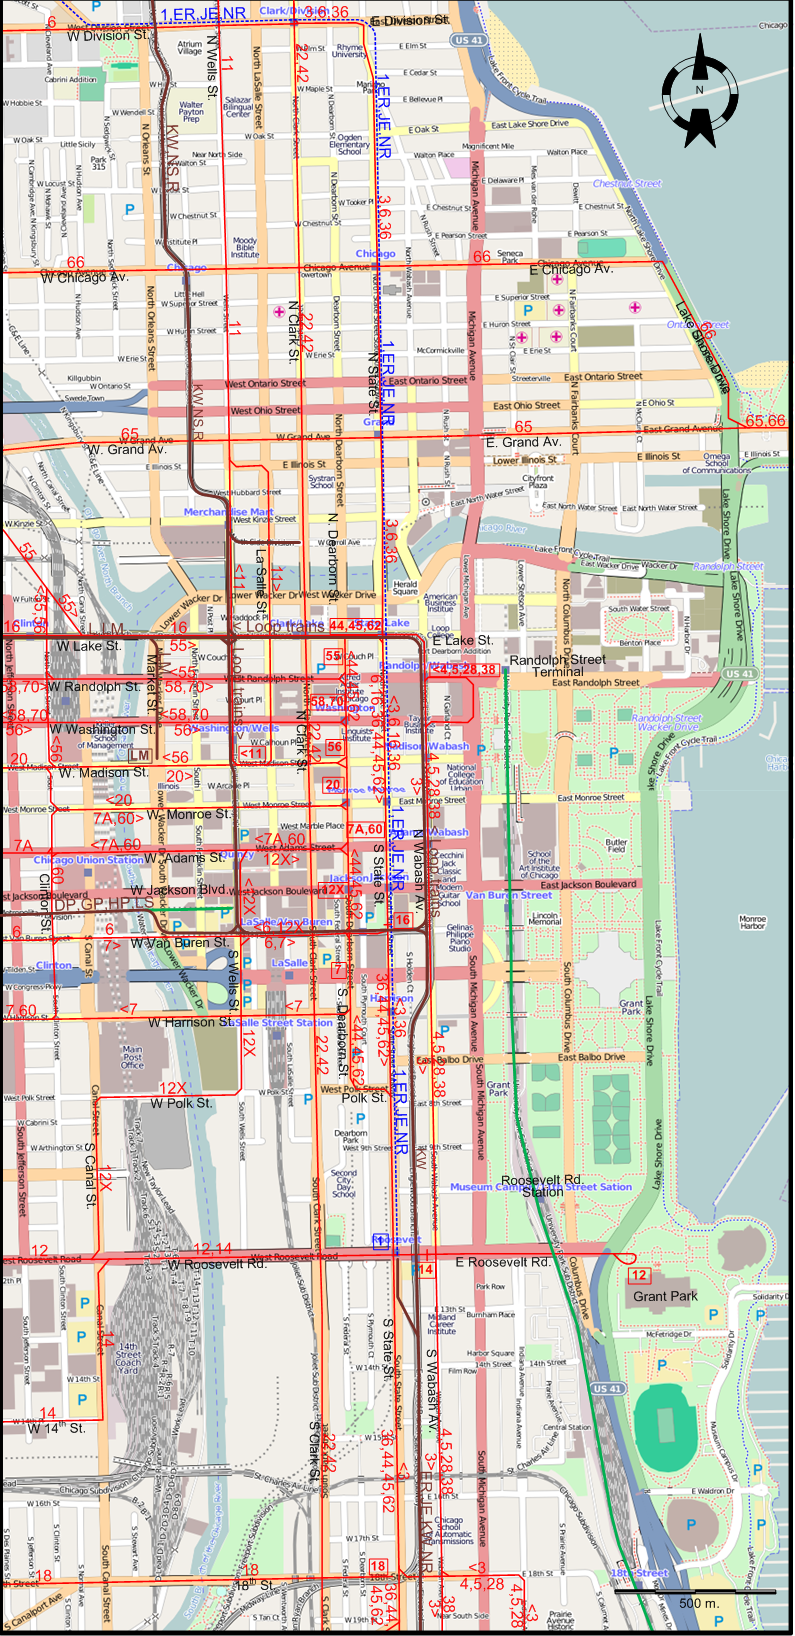 Chicago downtown tram map – 1947